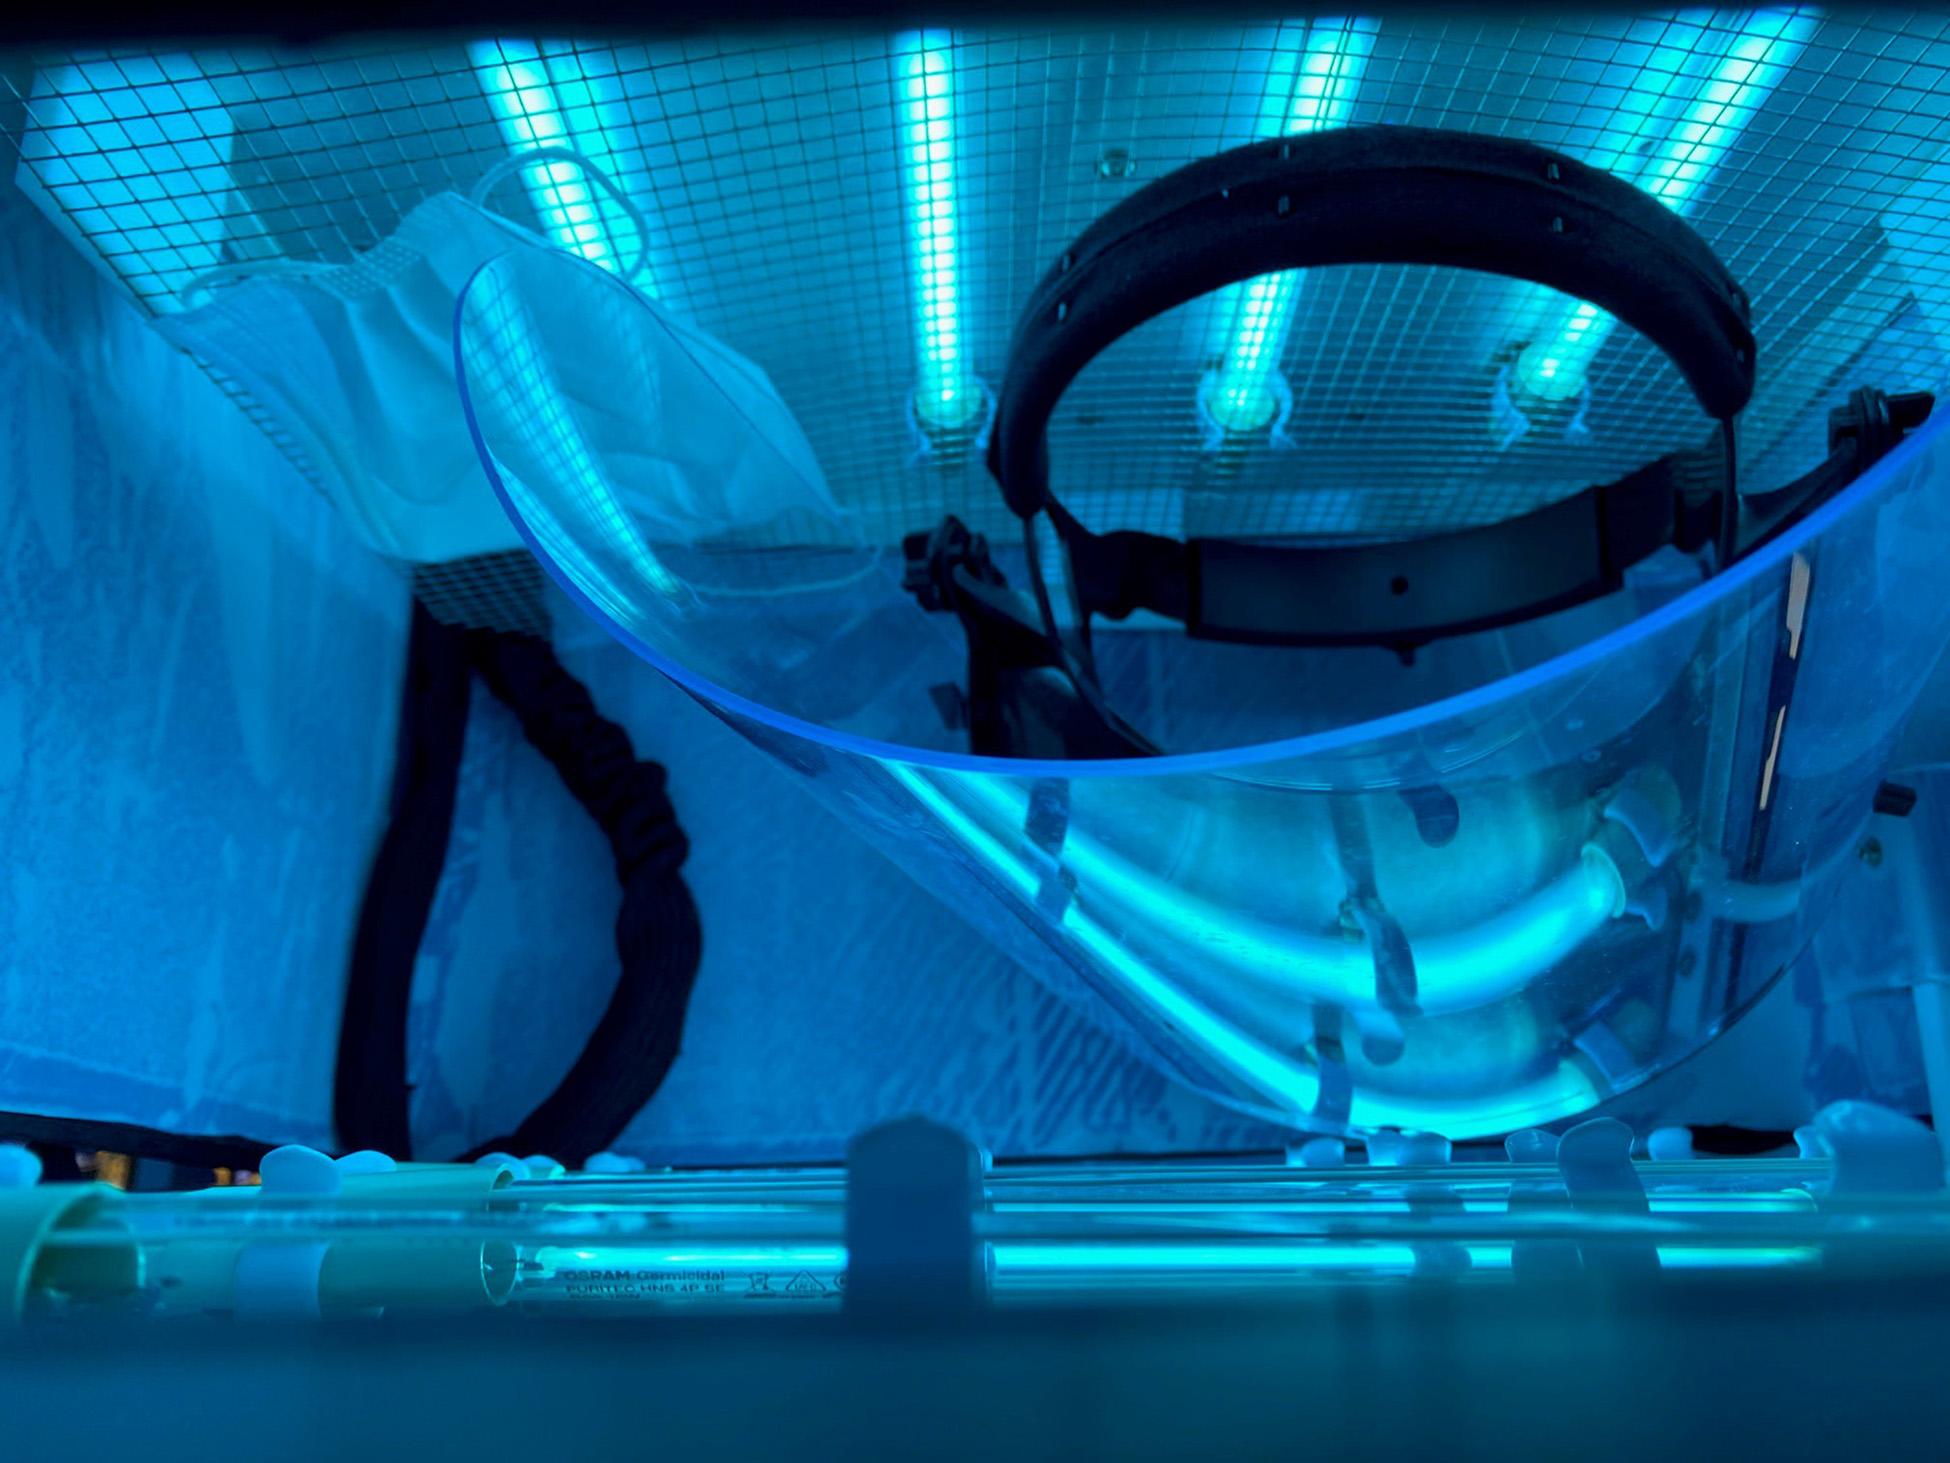 Newswise: Portable UV Disinfection Chambers Could Help Address PPE Shortage